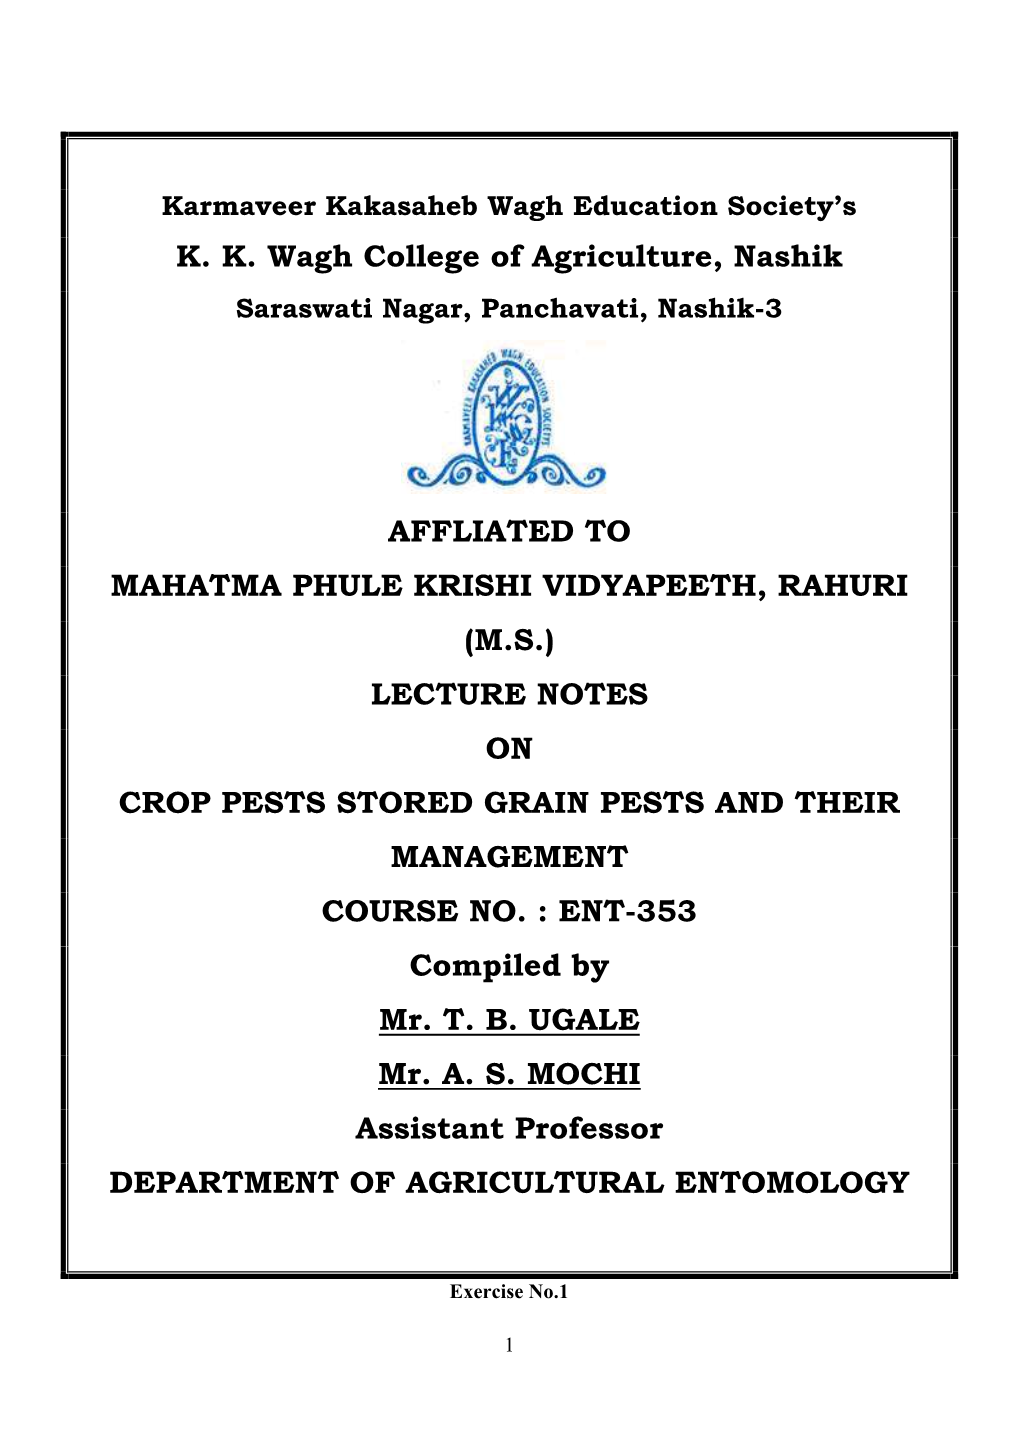 Lecture Notes on Crop Pests Stored Grain Pests and Their Management Course No